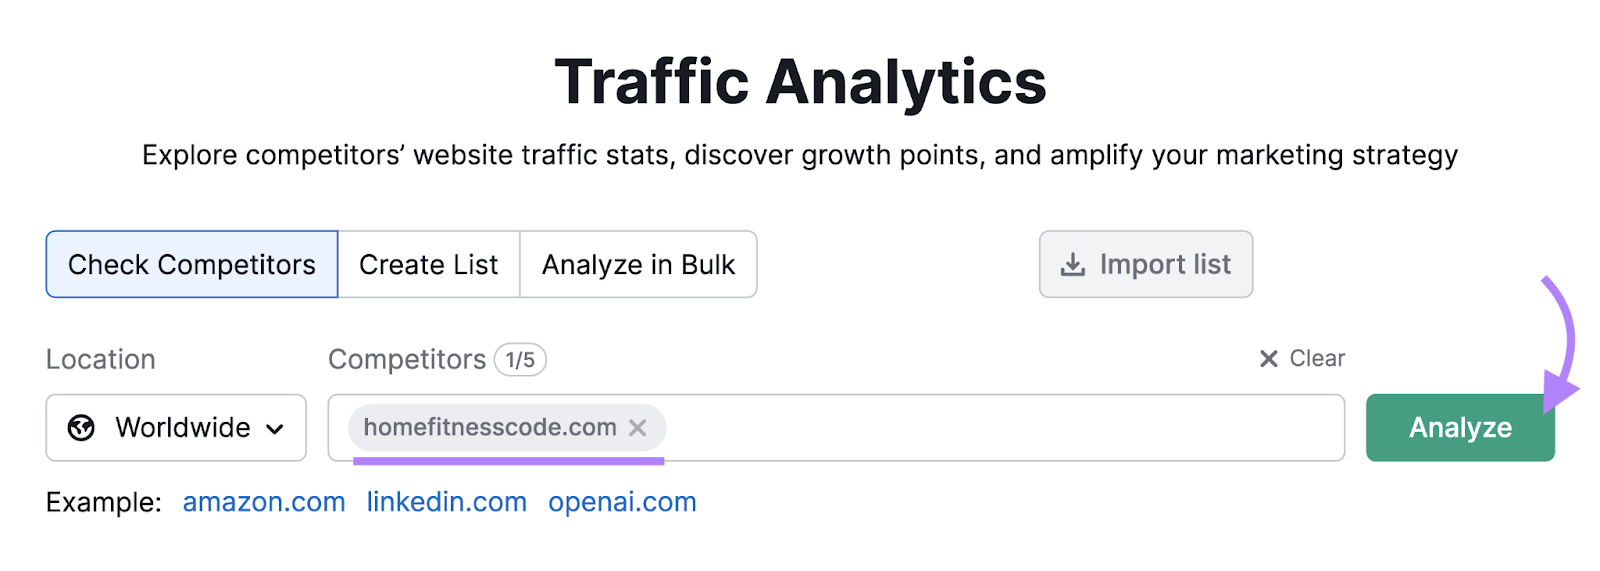 Traffic Analytics tool with "homefitnesscode.com" entered in the competitors bar.